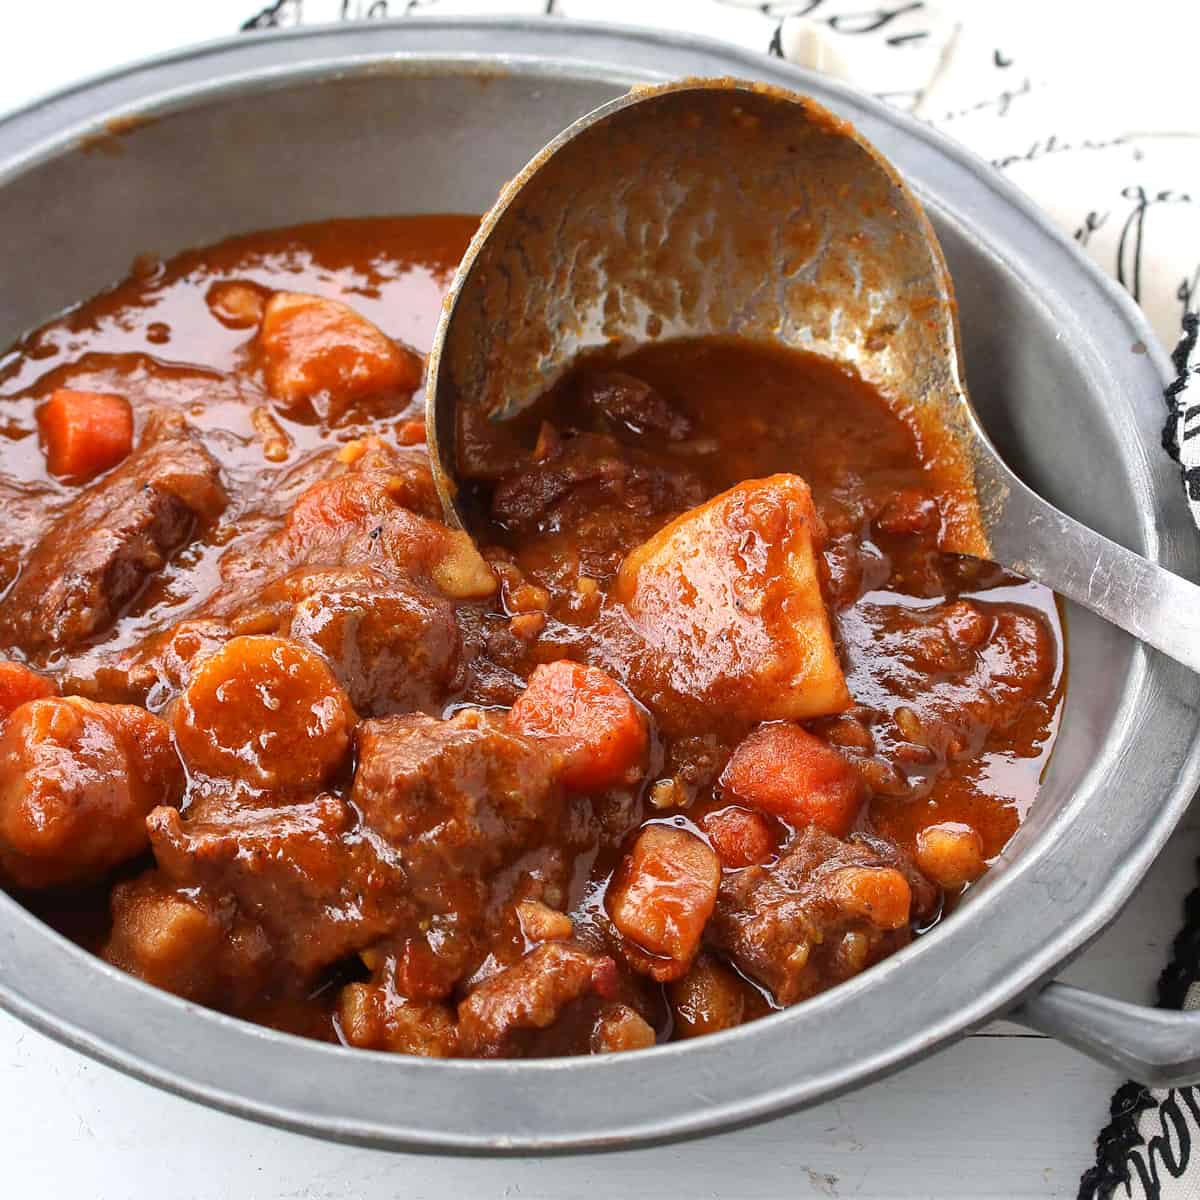 guinness stew recipe beef irish pub authentic traditional beer best st. patrick's day